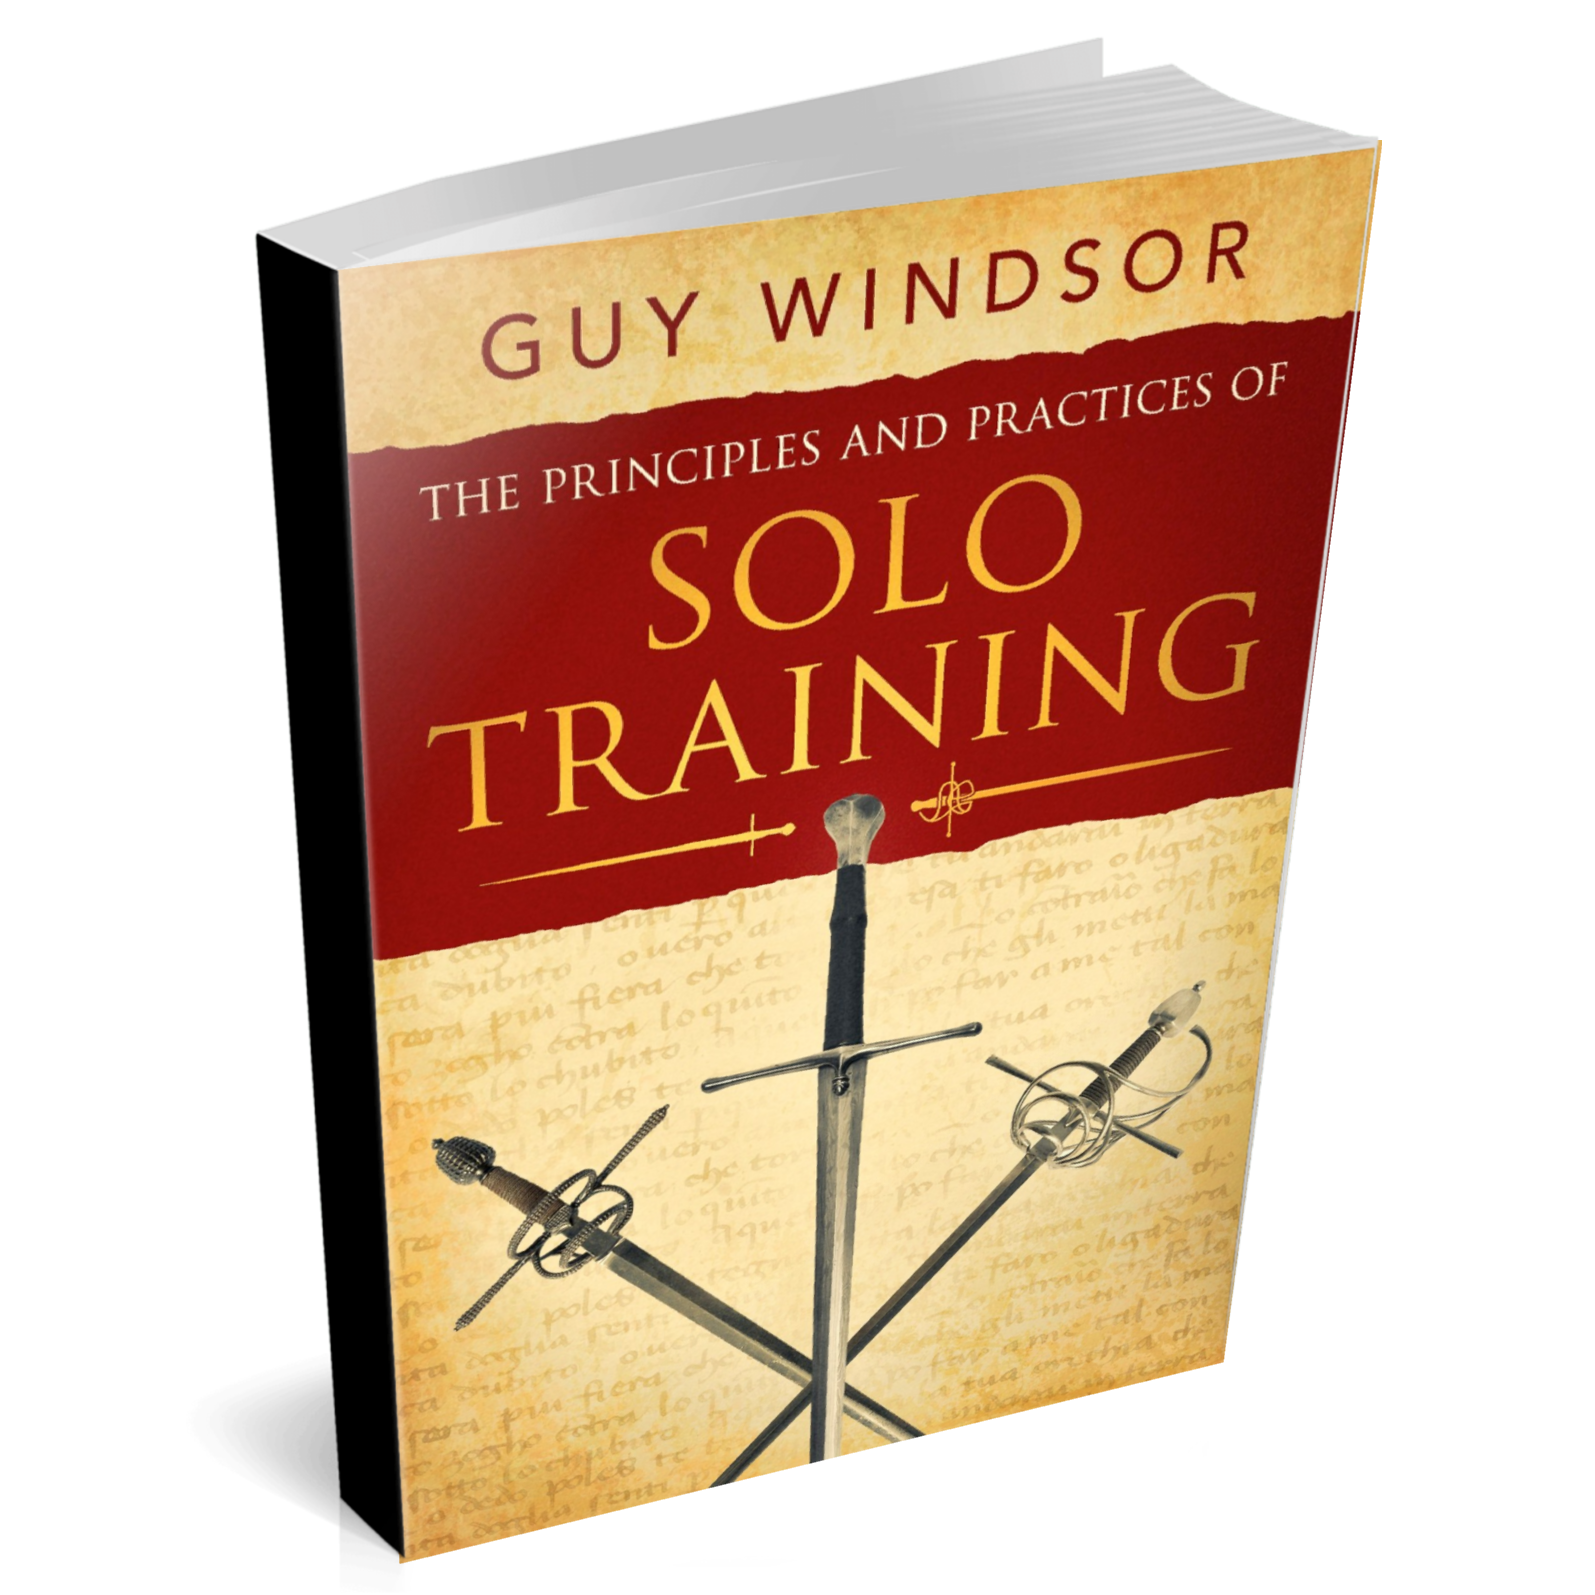 The Principles and Practices of Solo Training: A Guide for Historical Martial Artists, Sword People, and Everyone Else (Paperback))